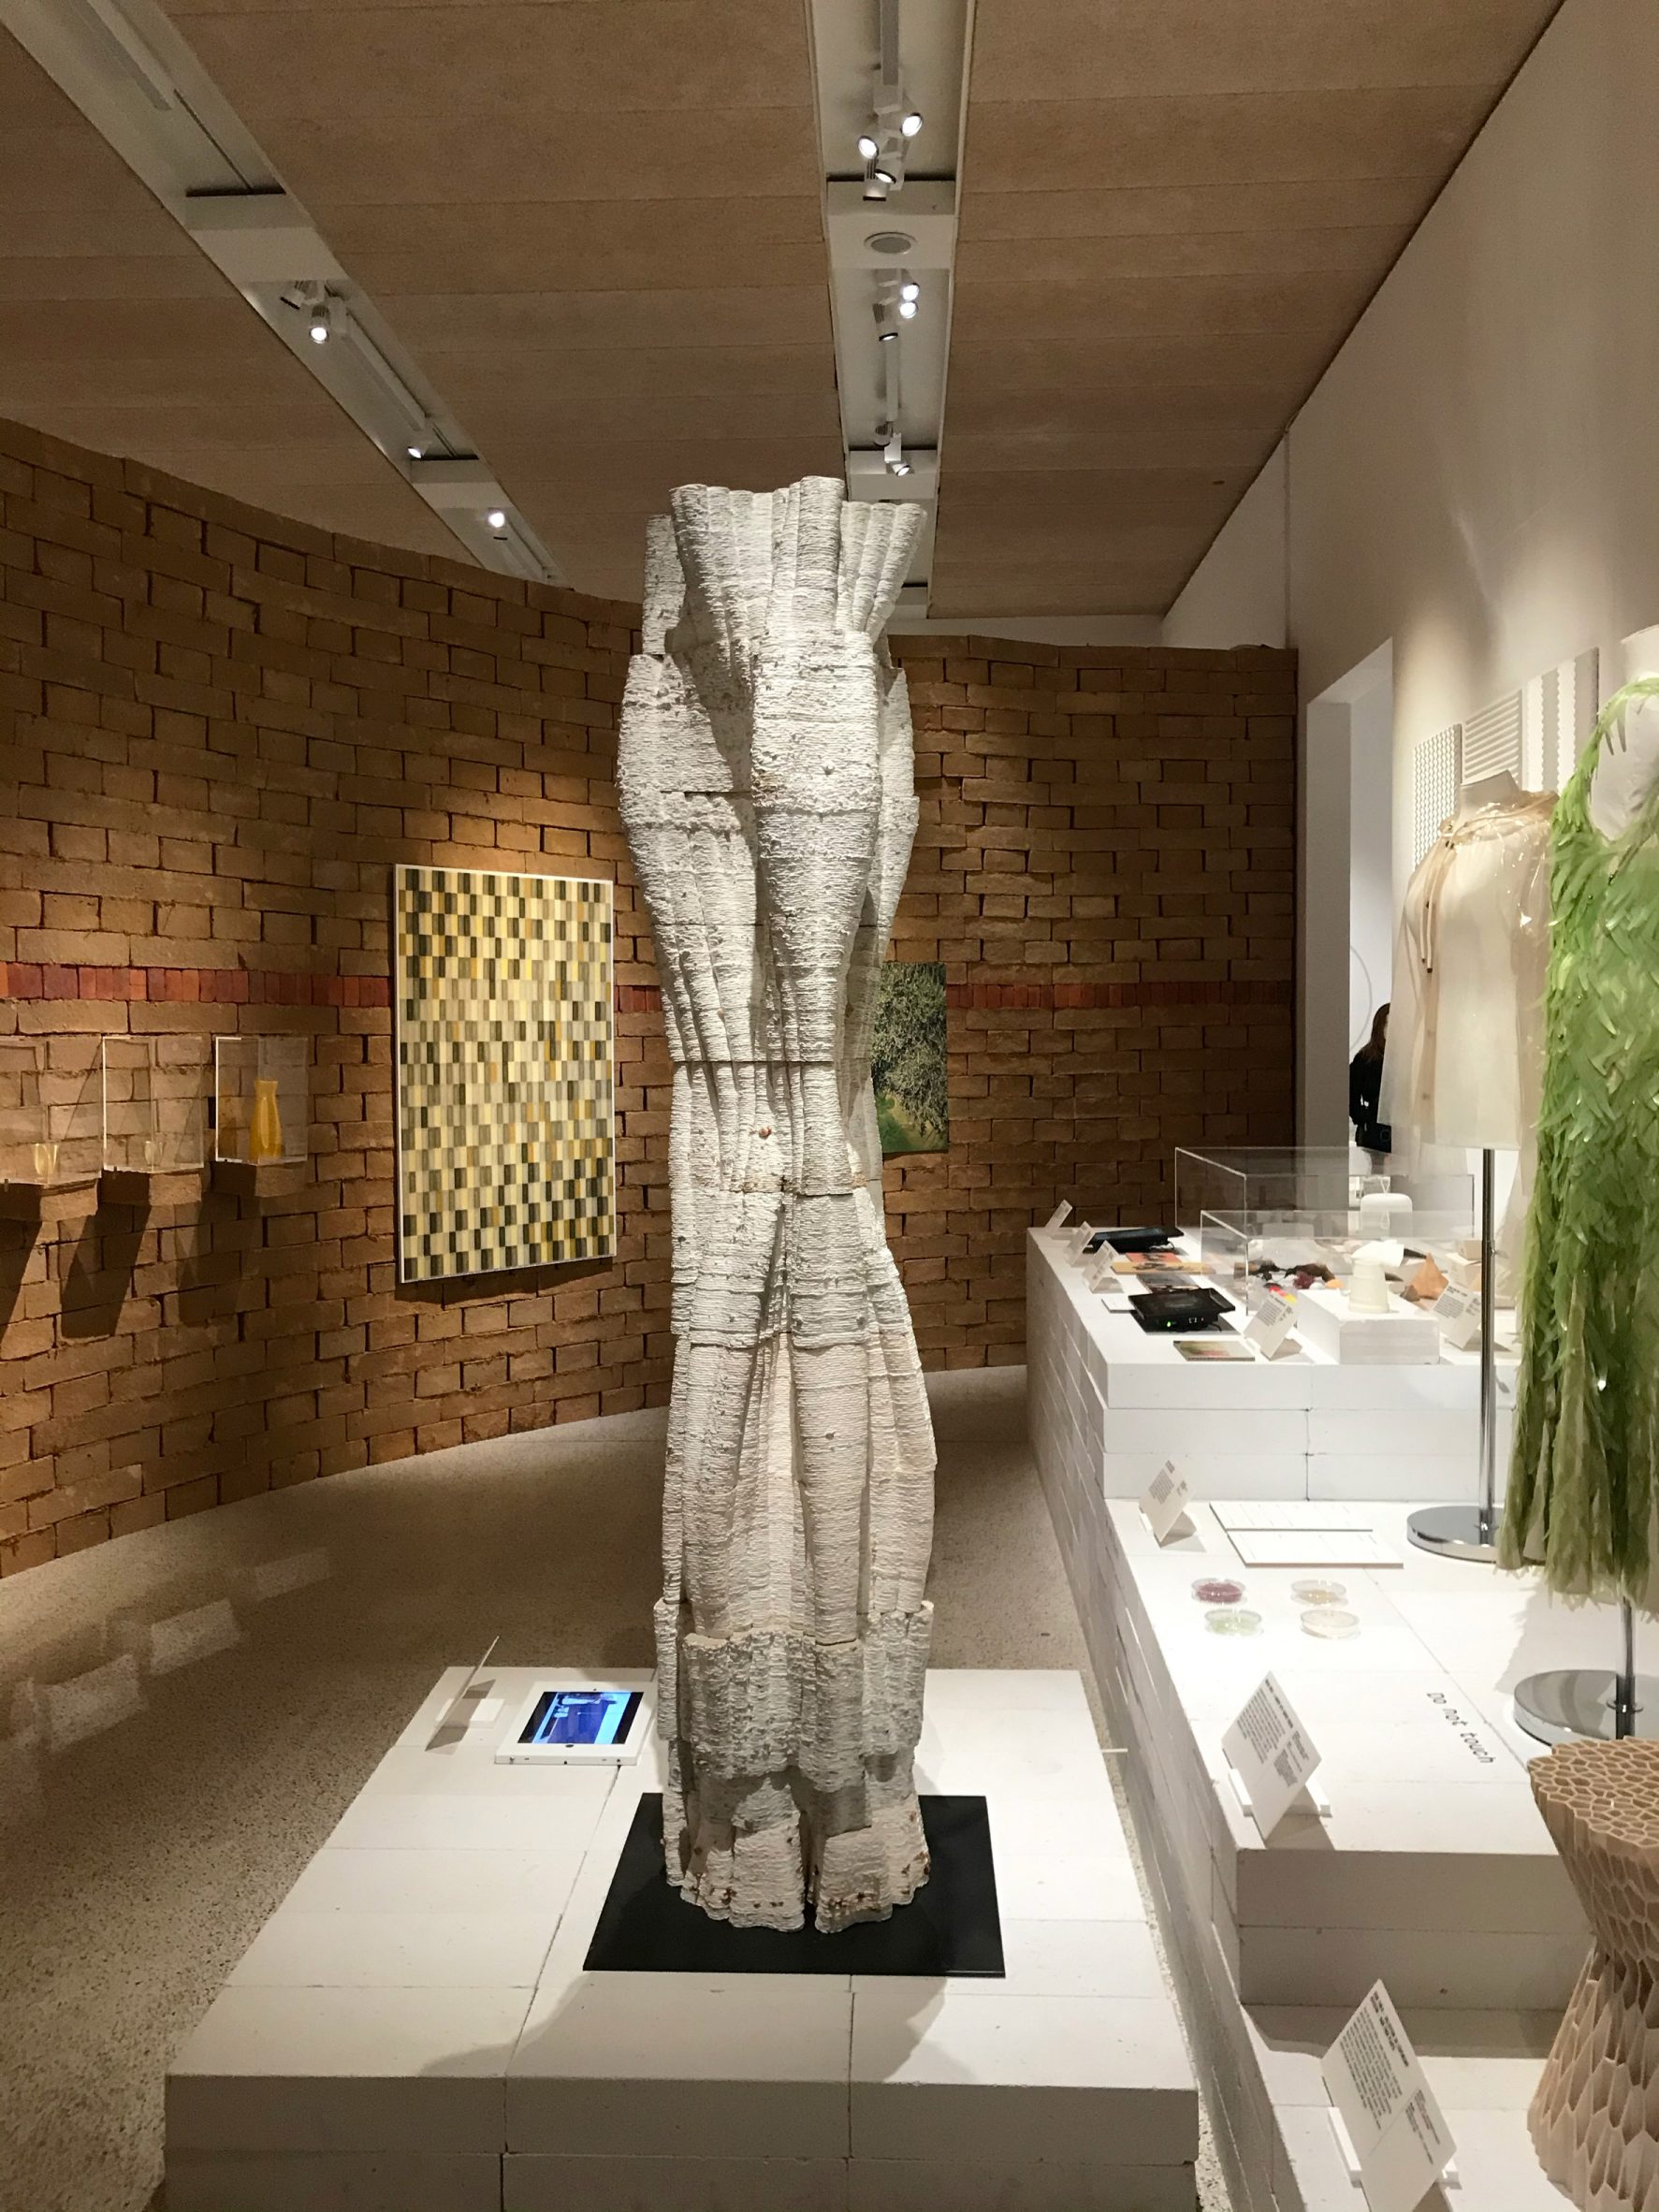 3D-printed mycelium column by Blast Studio at the Waste Age exhibition in London's Design Museum